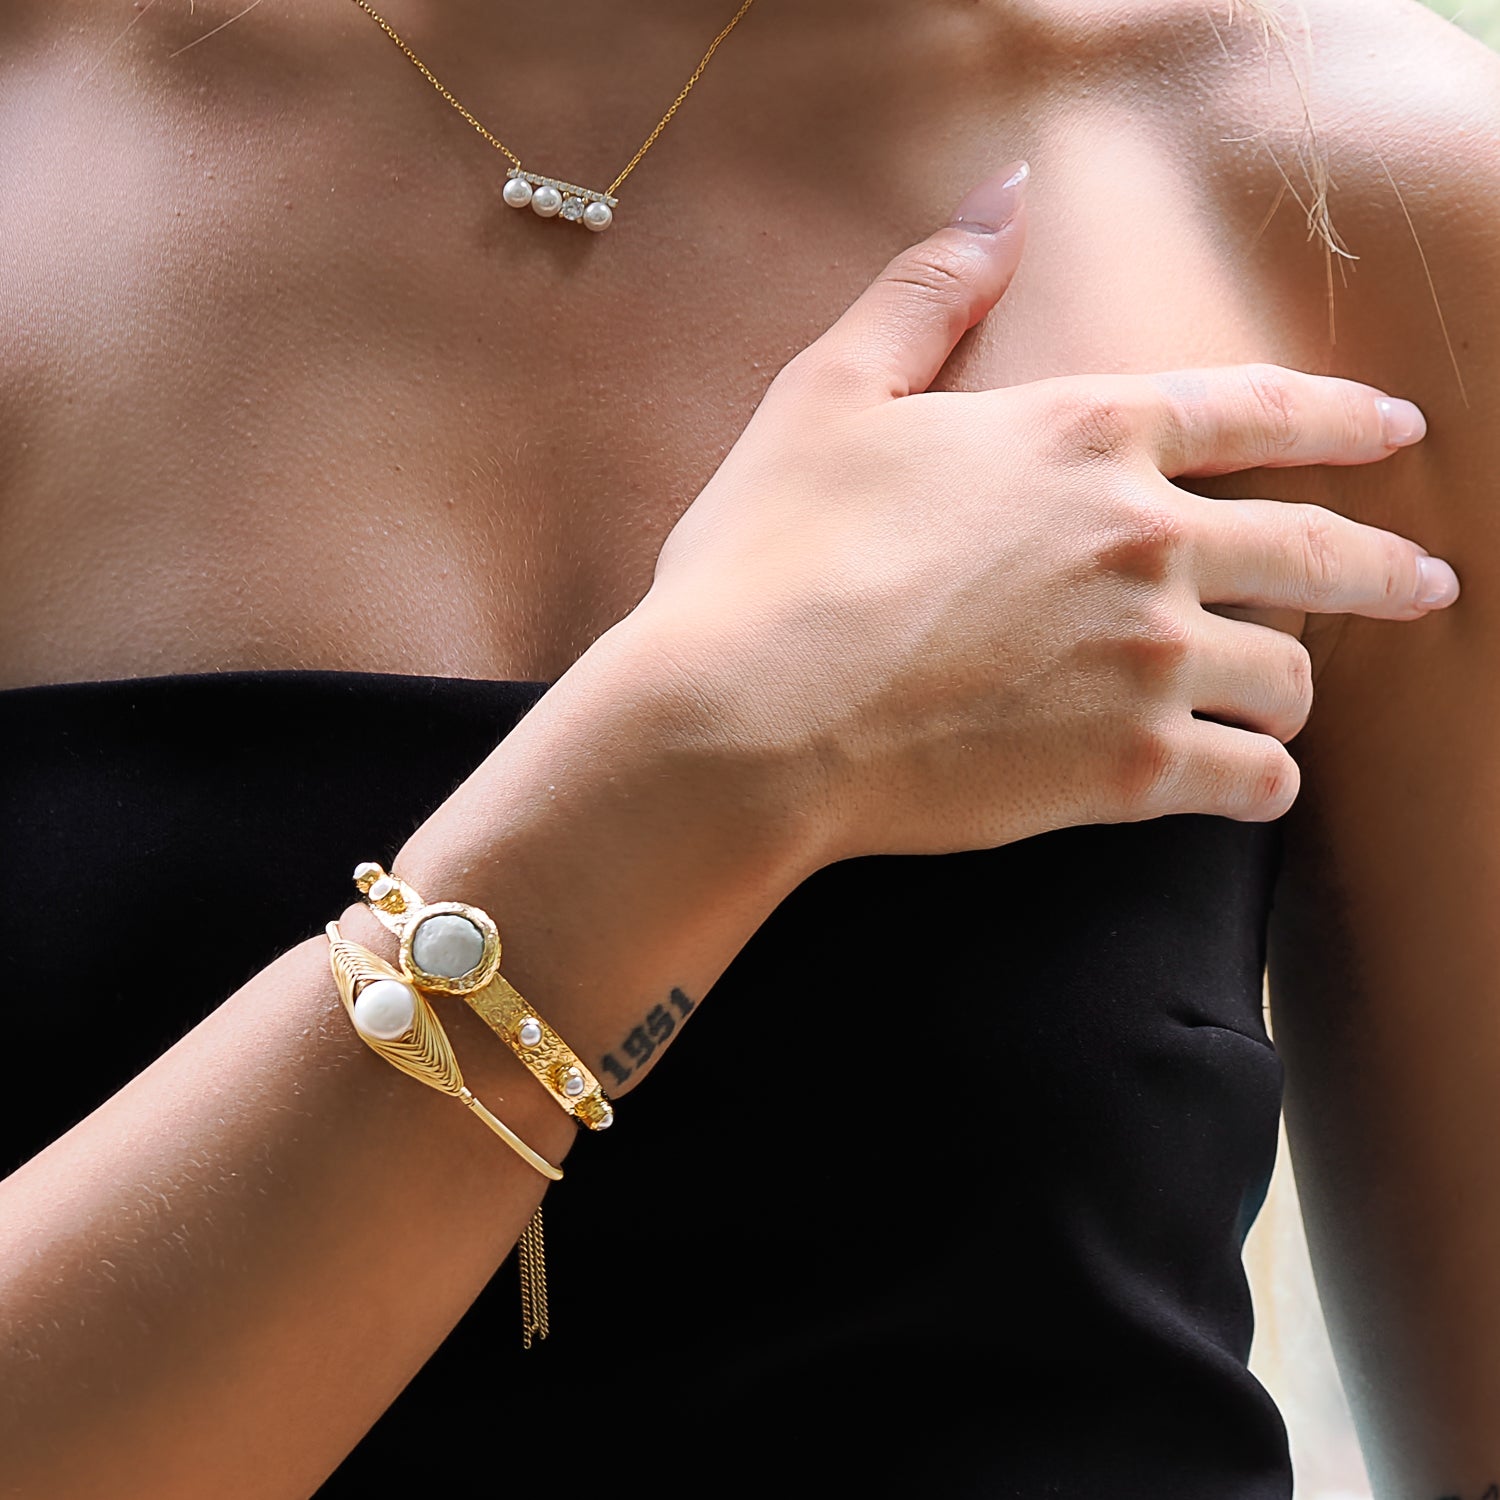 Model radiates elegance with the opulent Cleopatra Gold and Pearl Bangle Bracelet.